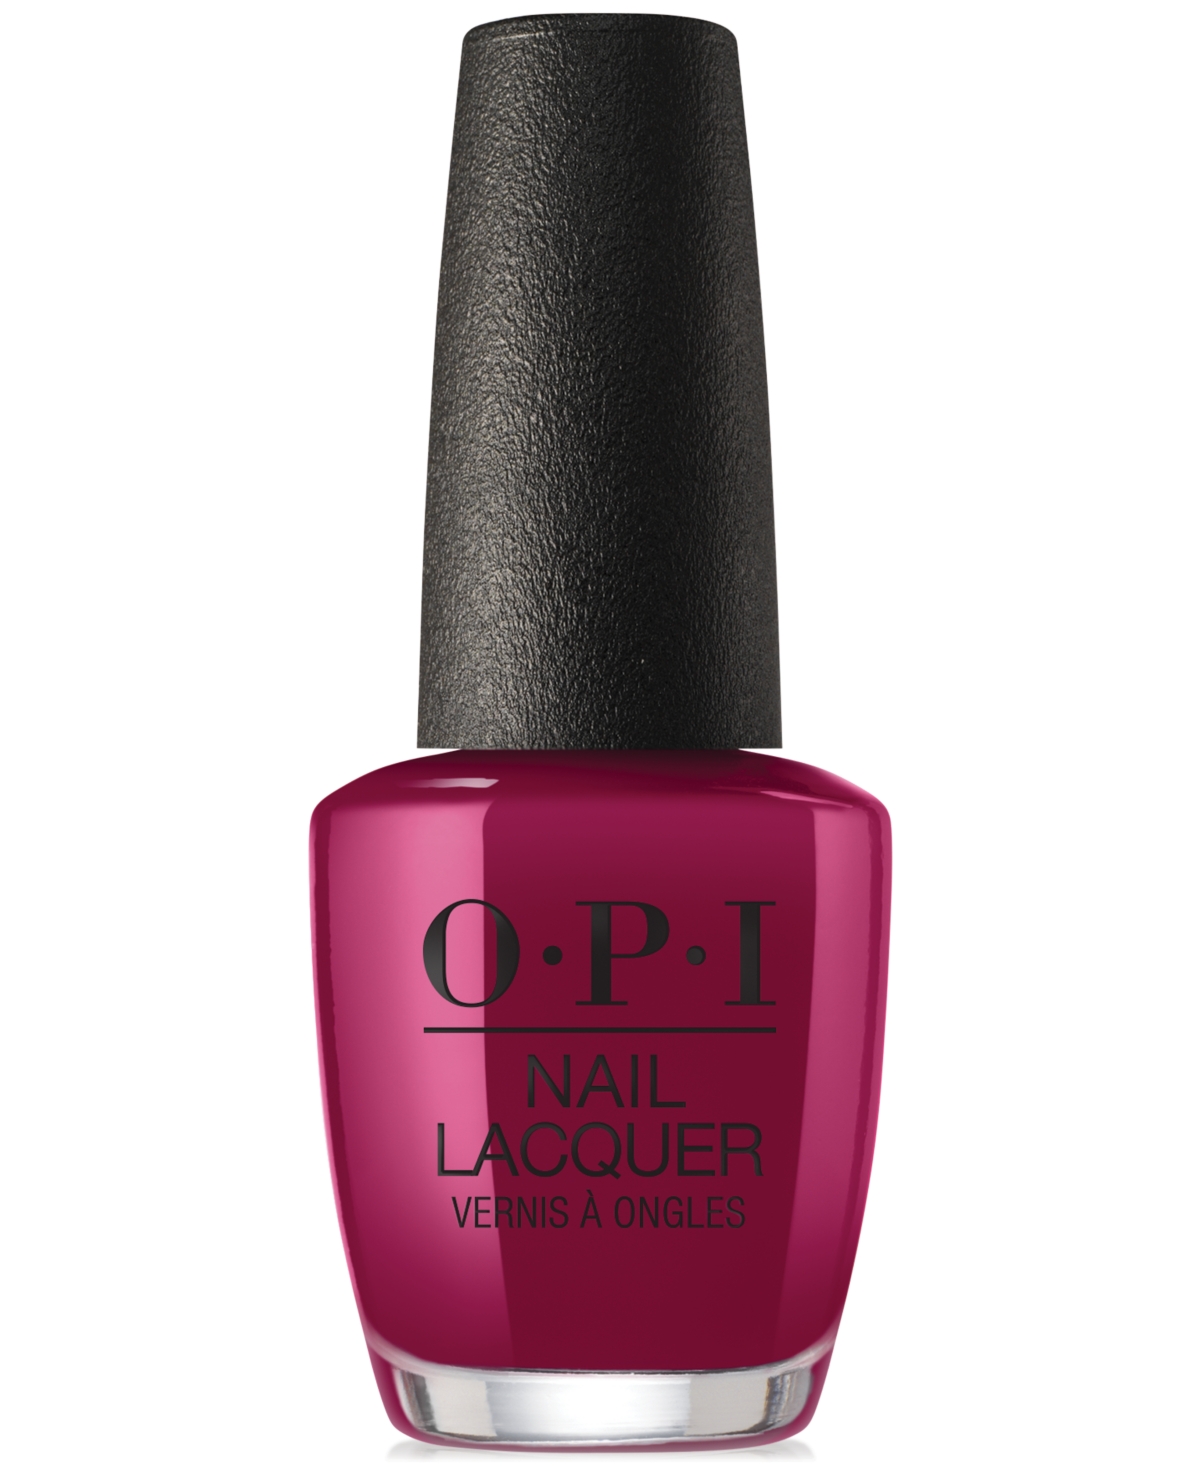 Opi Nail Lacquer In Miami Beet